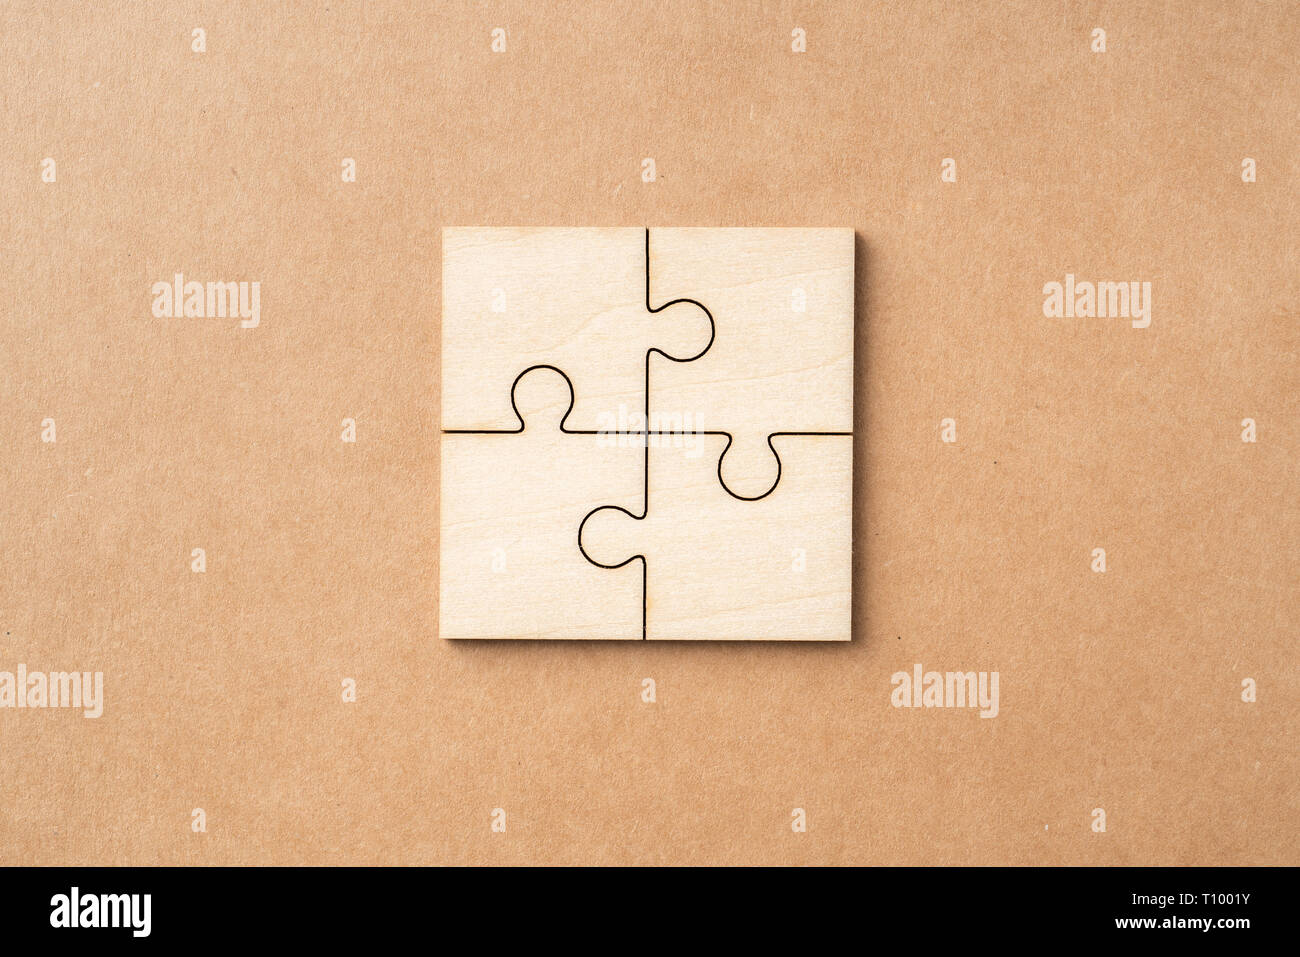 Download Business And Design Concept Jigsaw Icon On Kraft Paper For Infographic Mockup Stock Photo Alamy PSD Mockup Templates